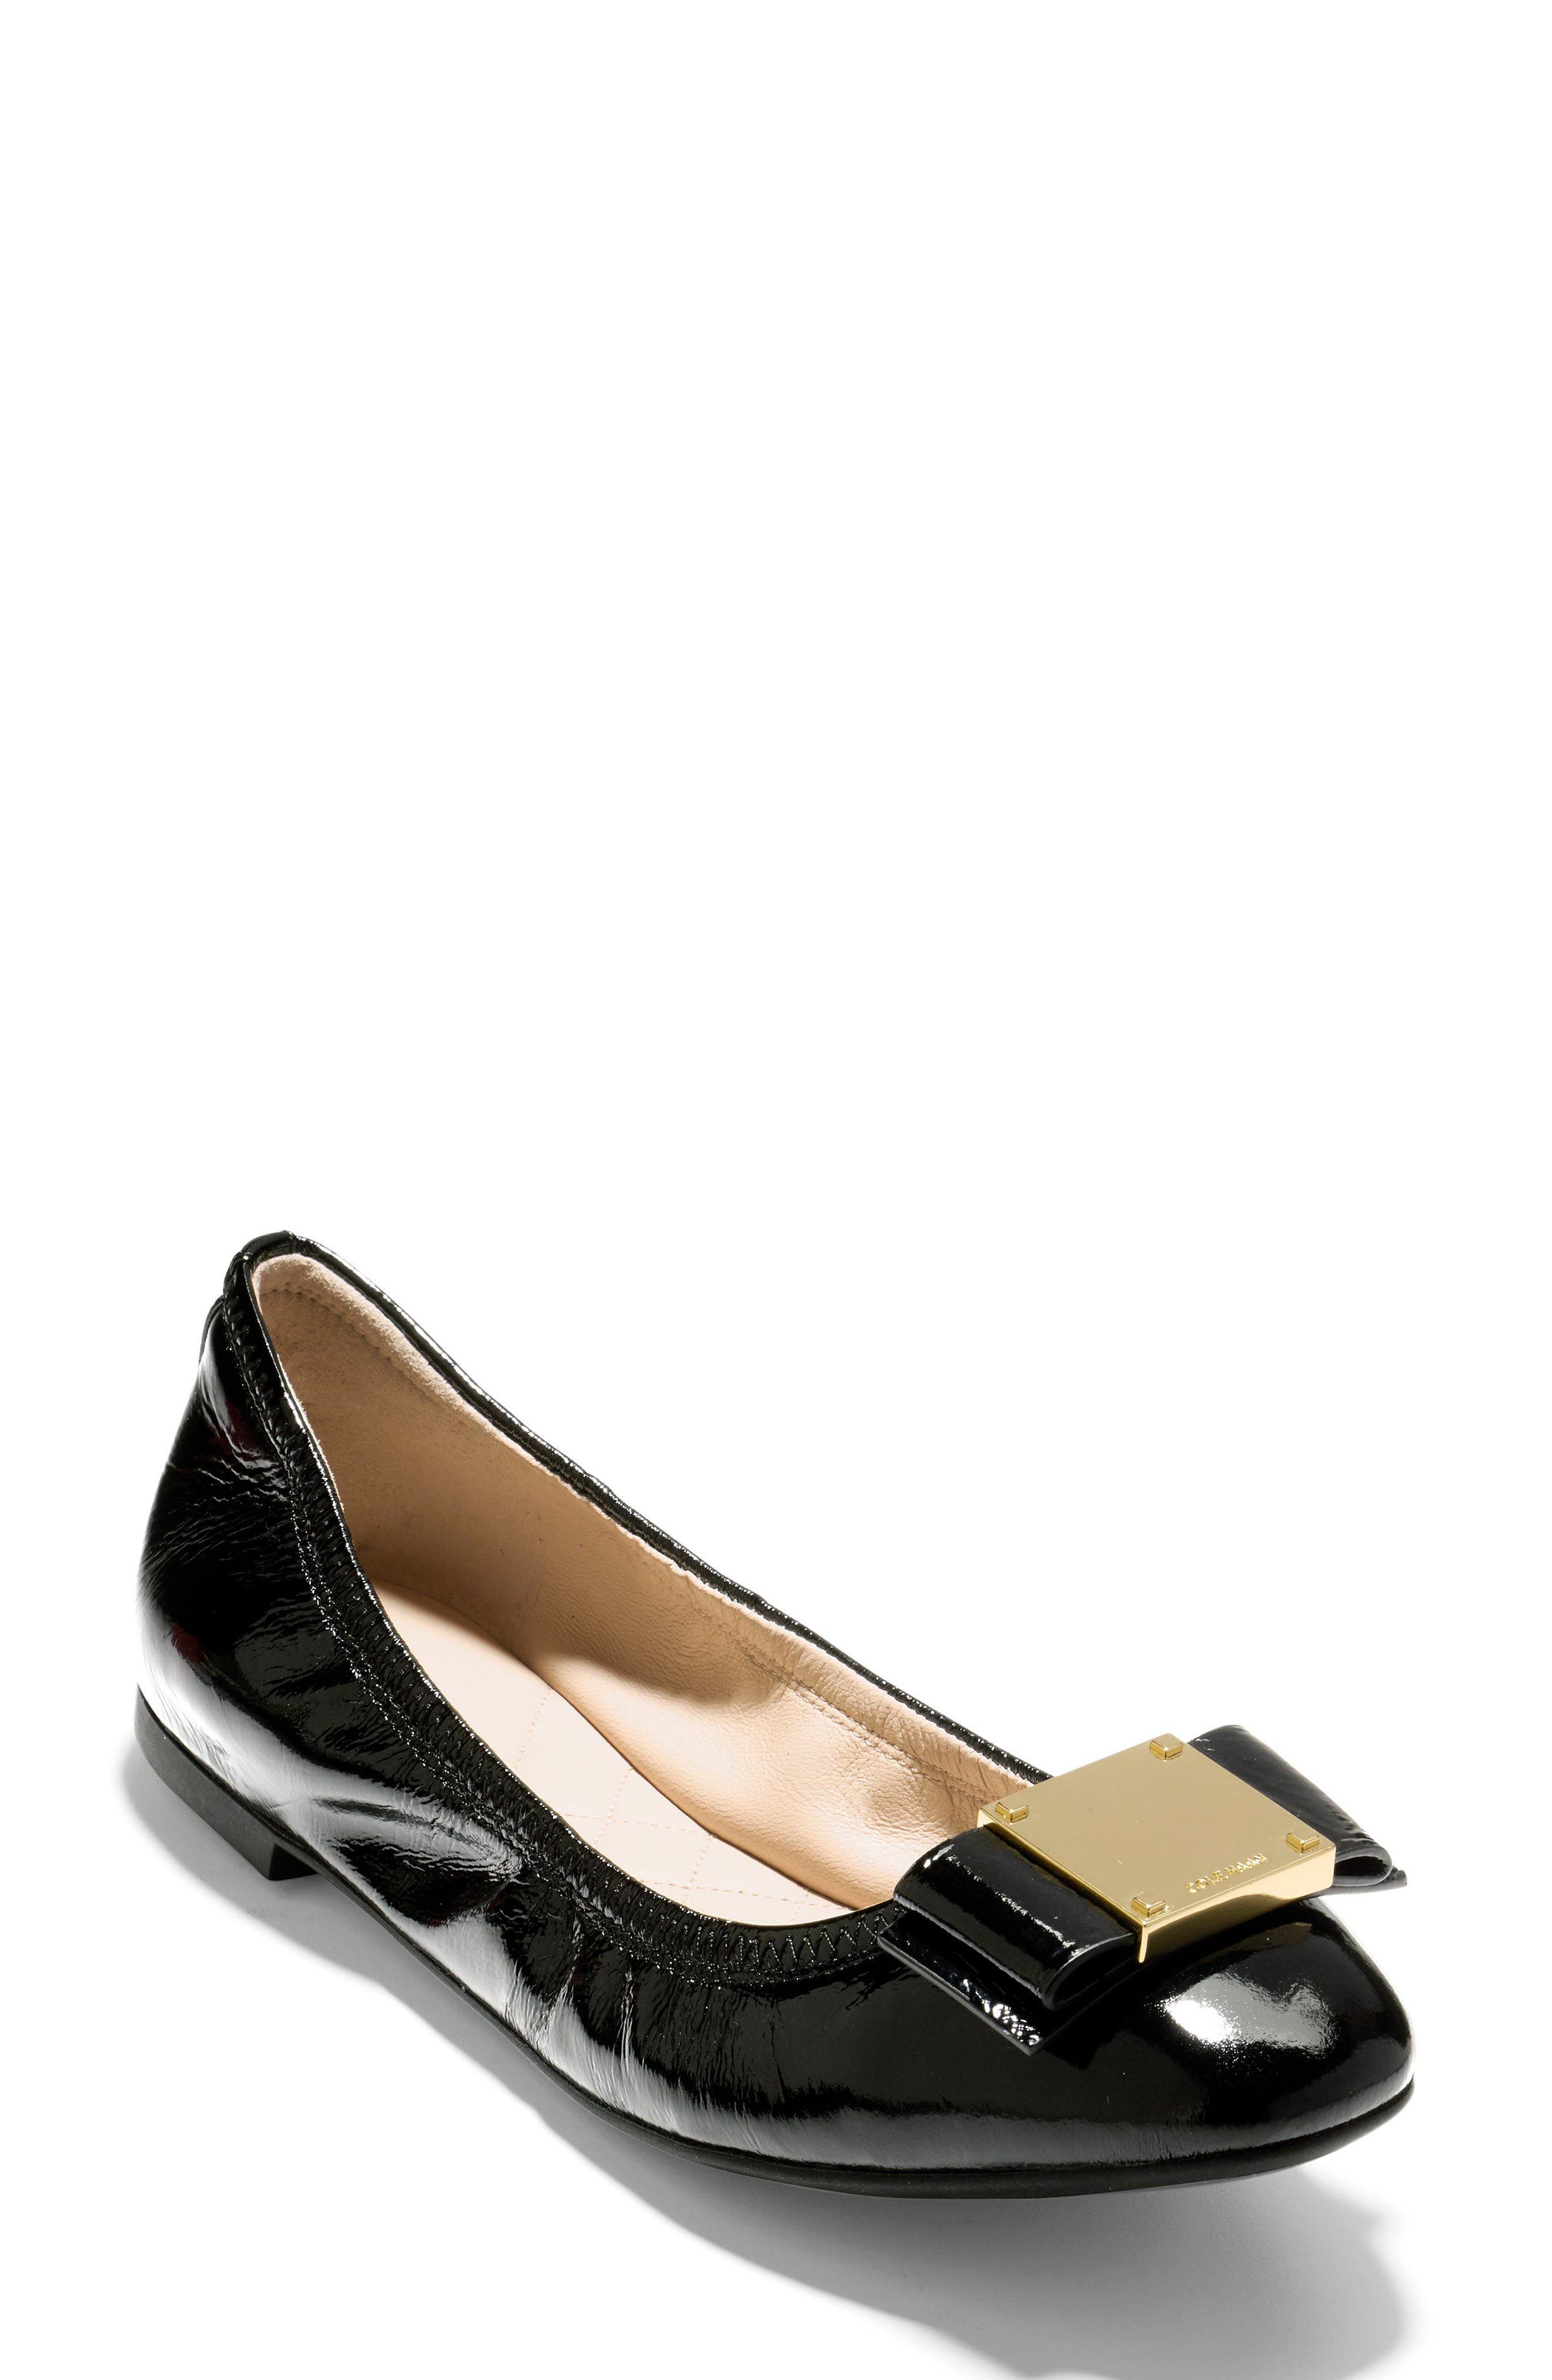 tali bow ballet flat cole haan